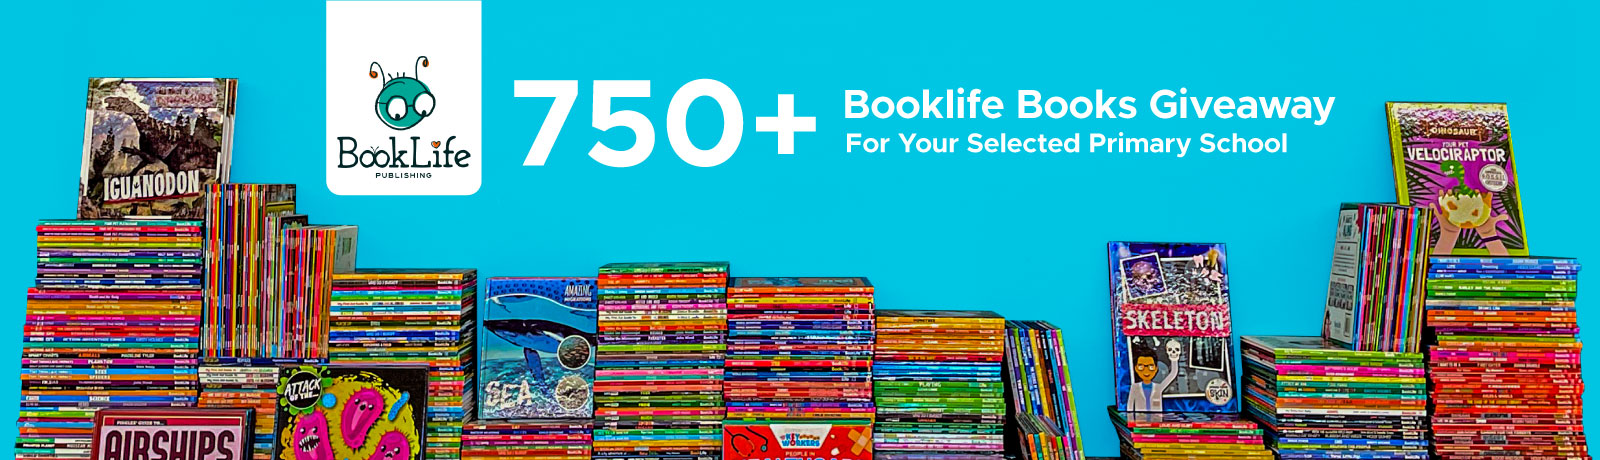 BookLife Competition